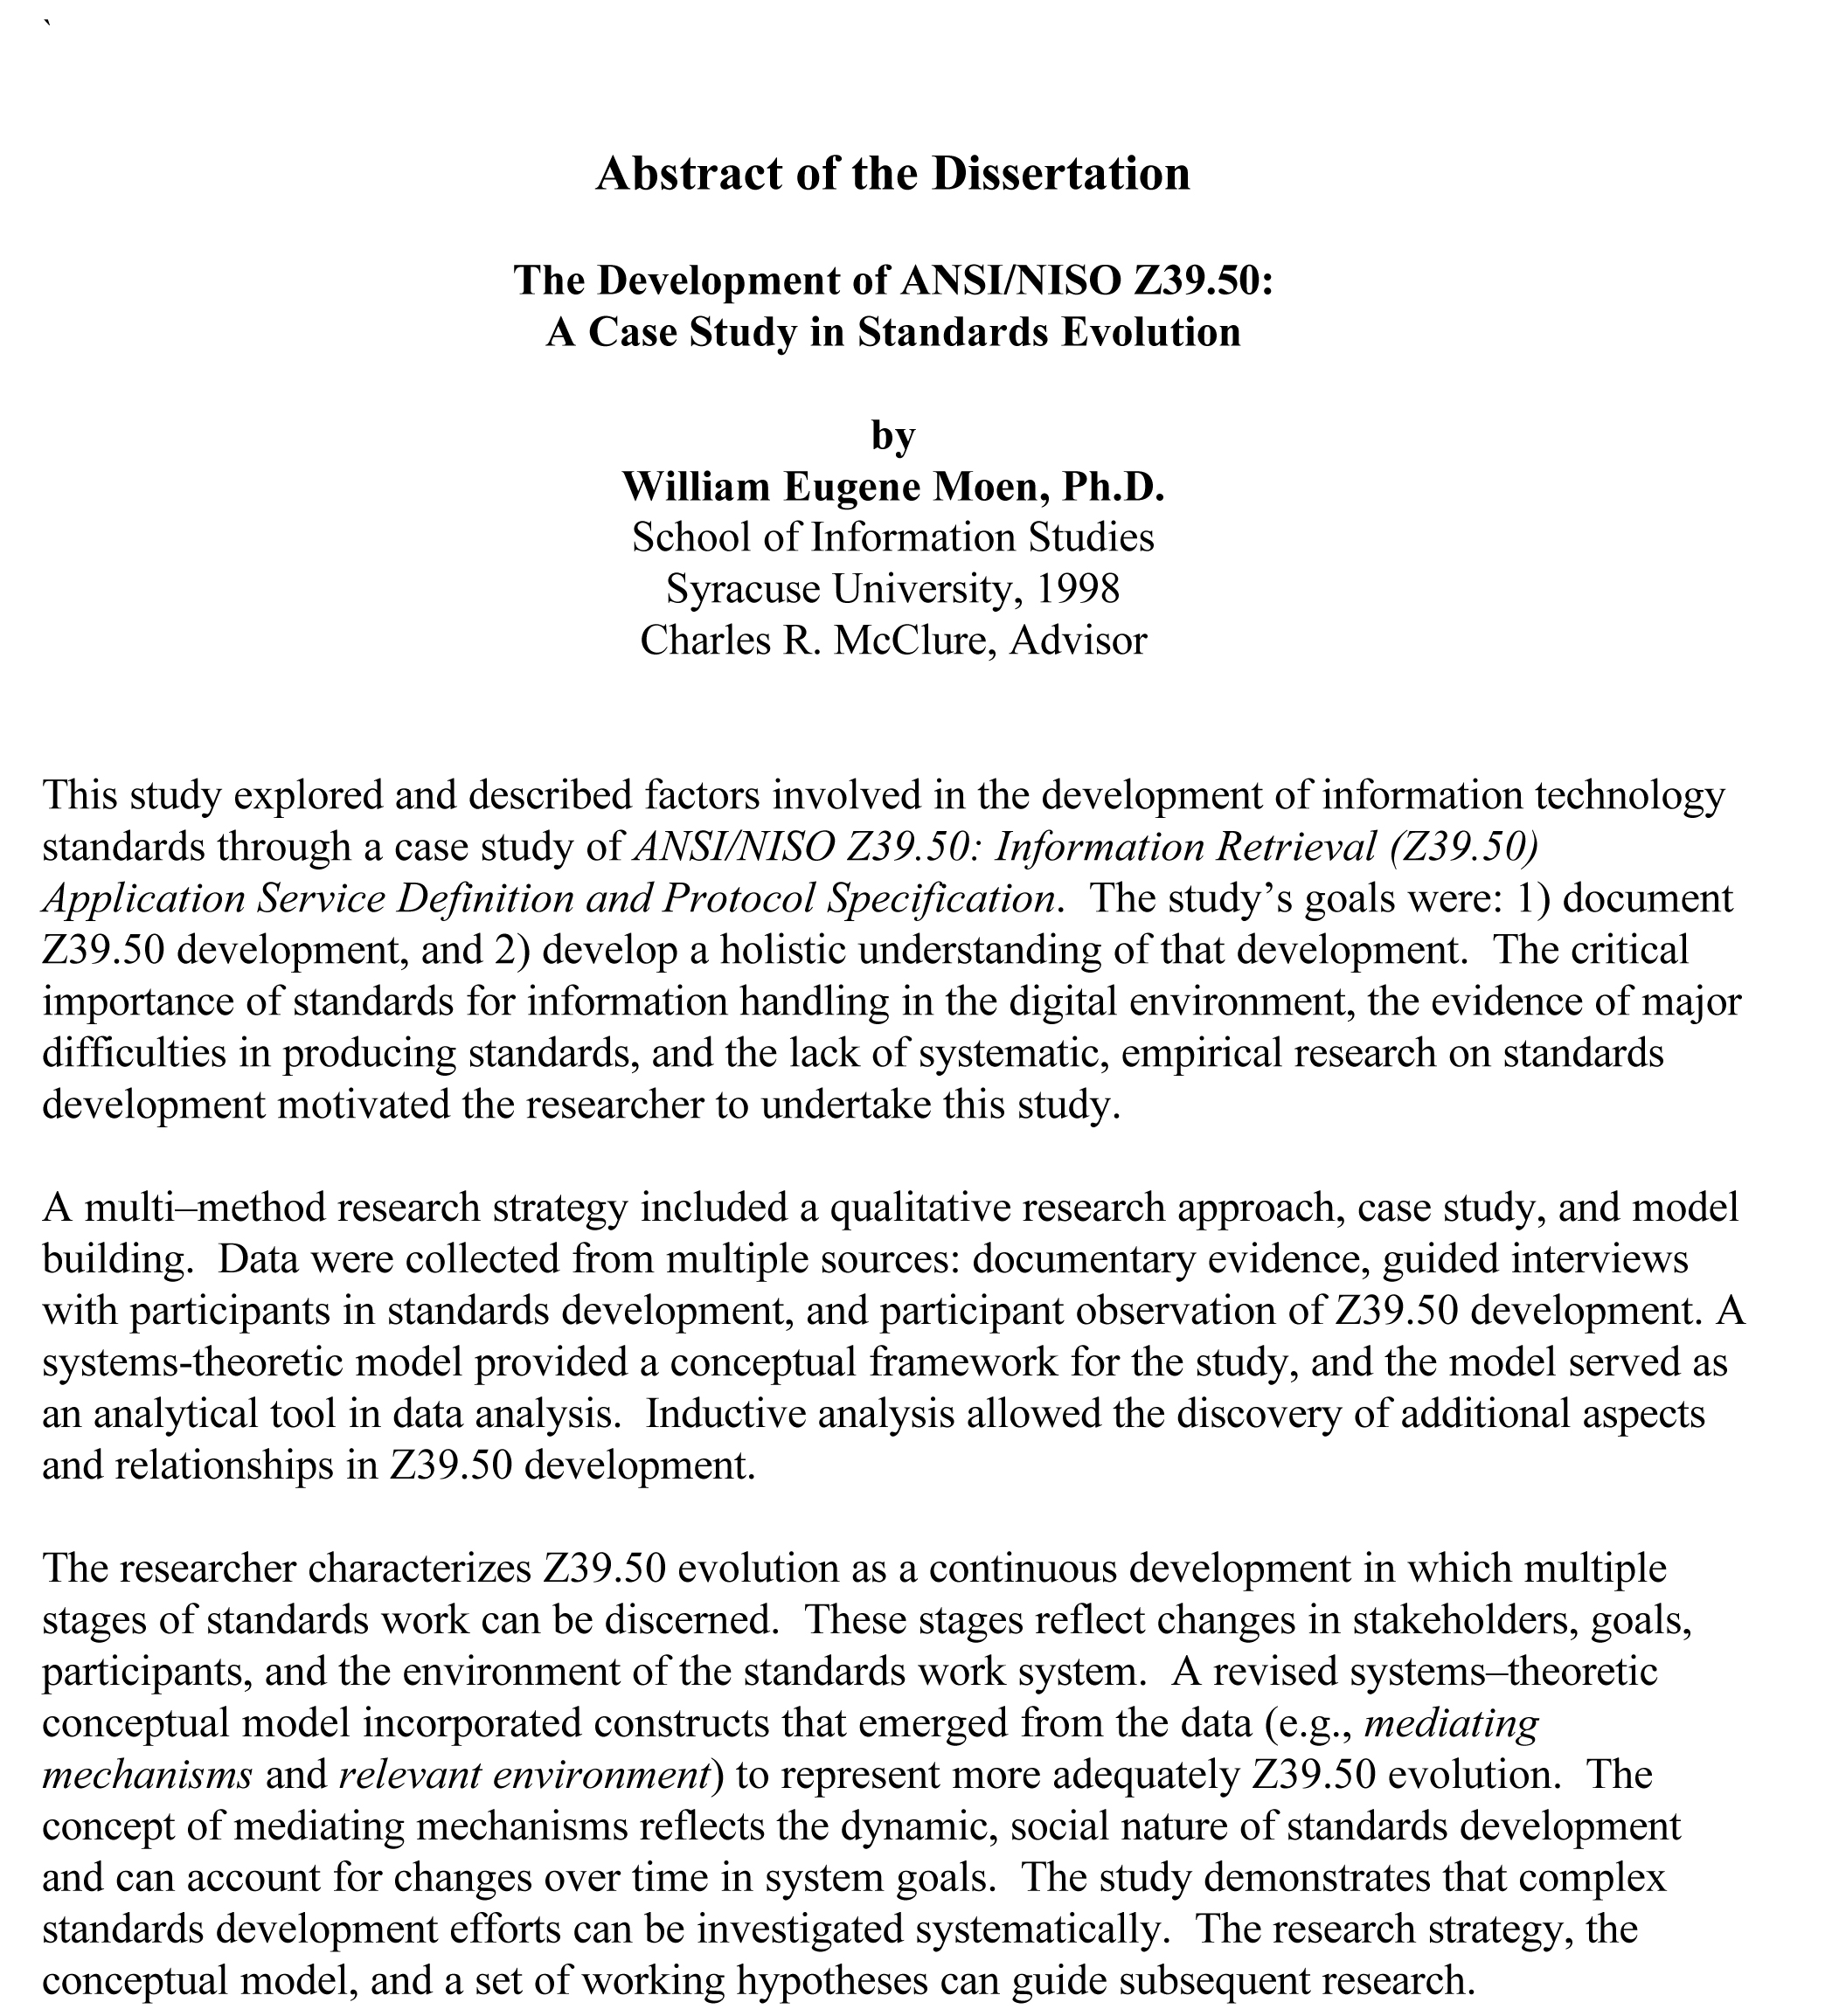 Abstract of a dissertation proposal